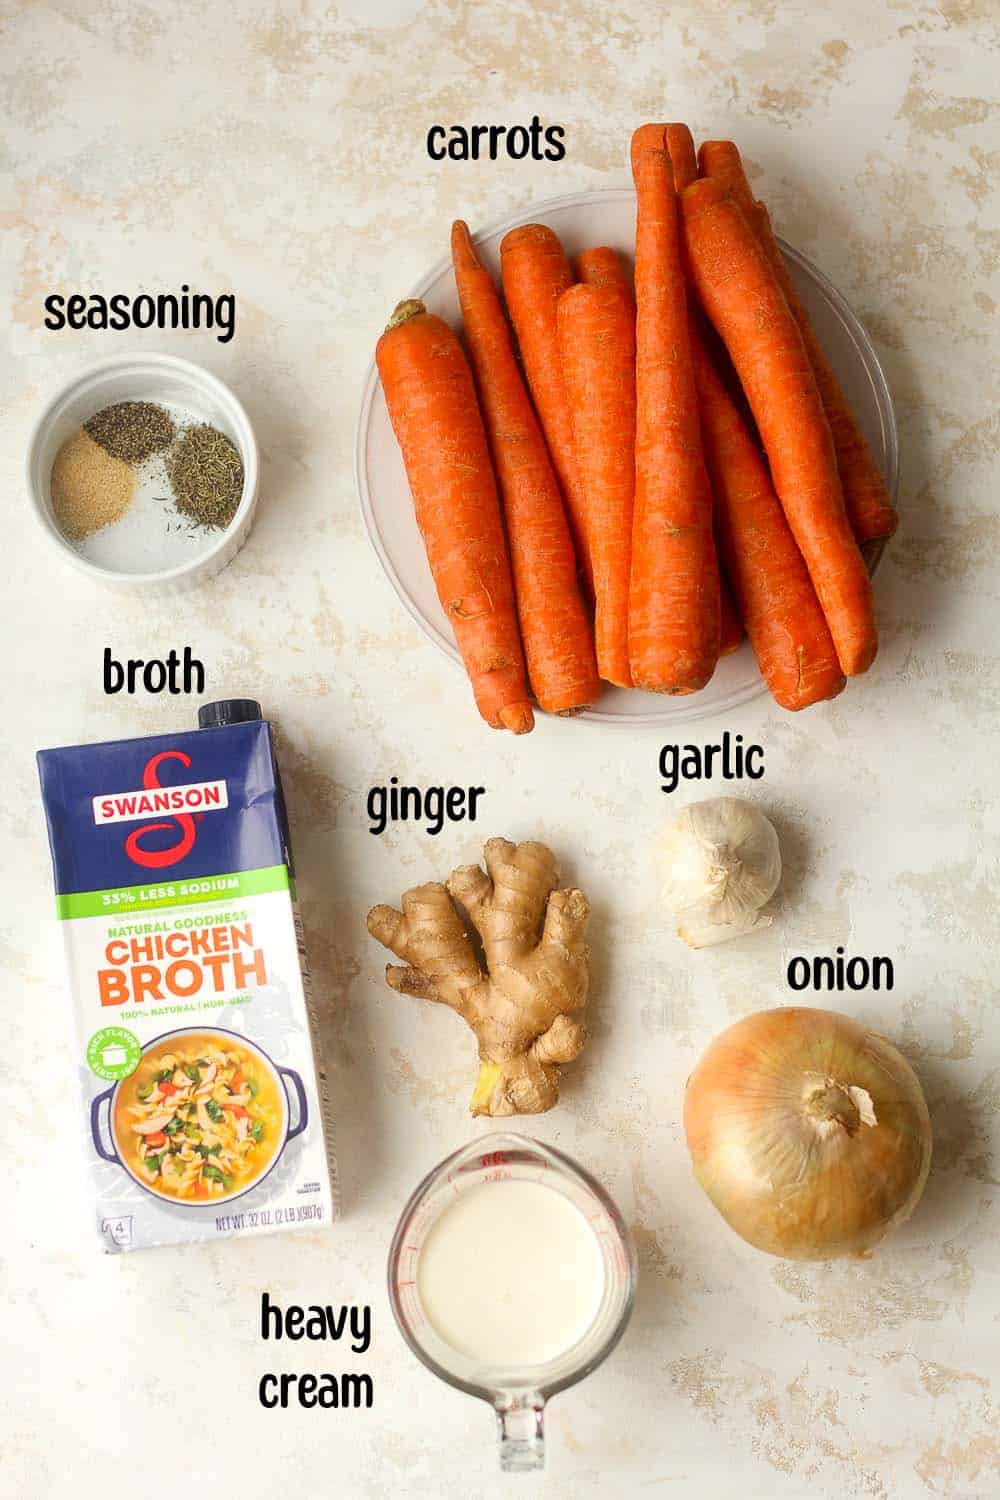 The ingredients for the carrot soup.